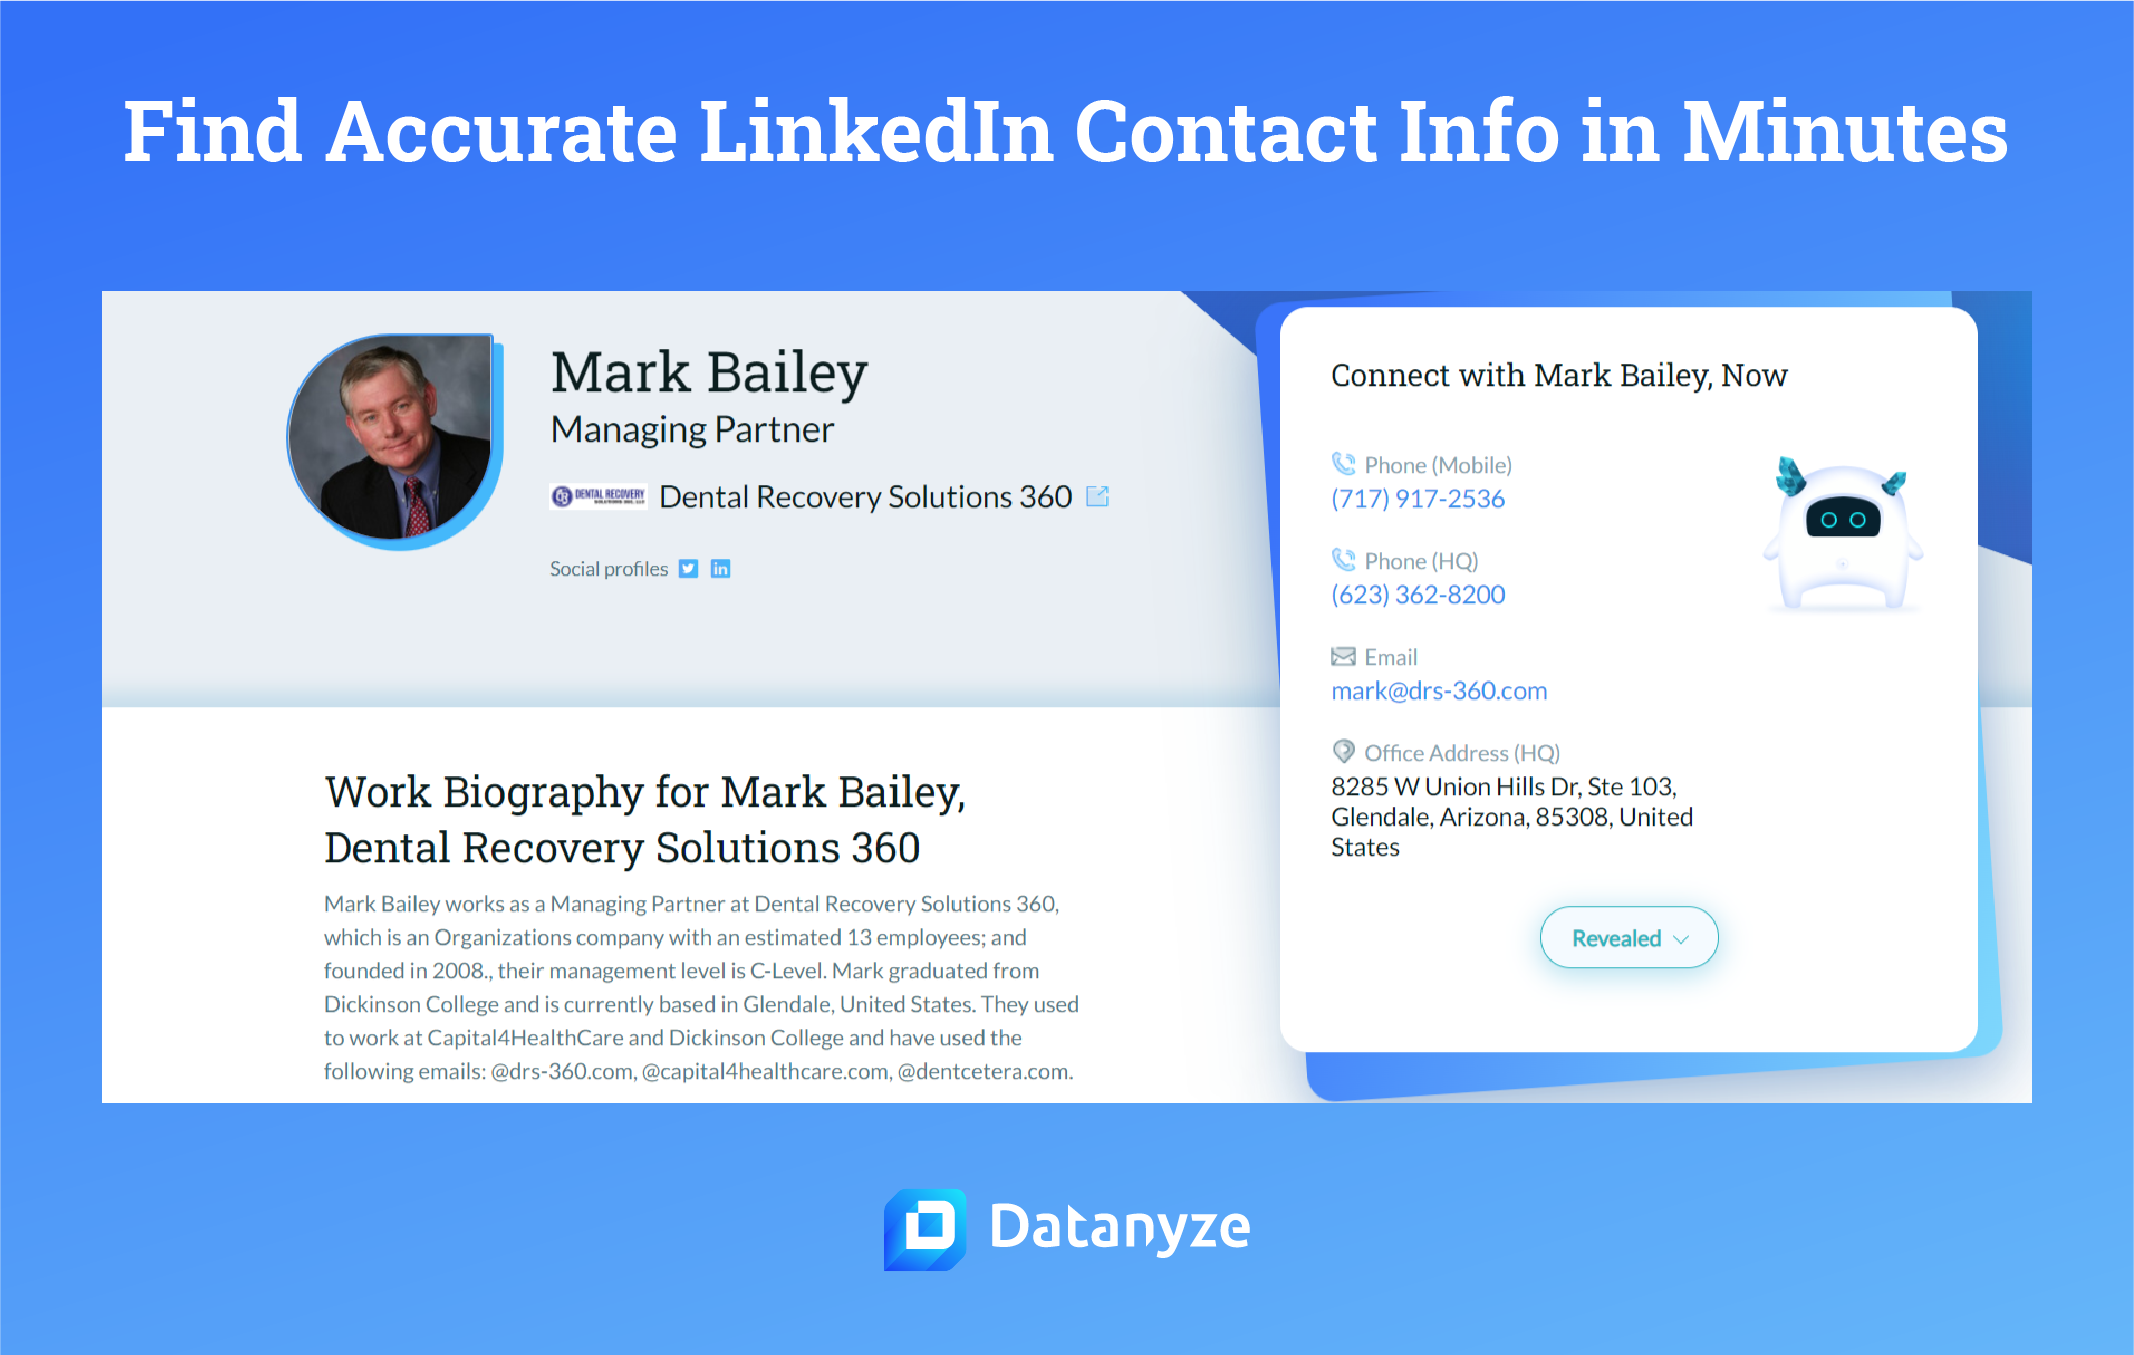 Find Accurate LinkedIn Contact Info in Minutes